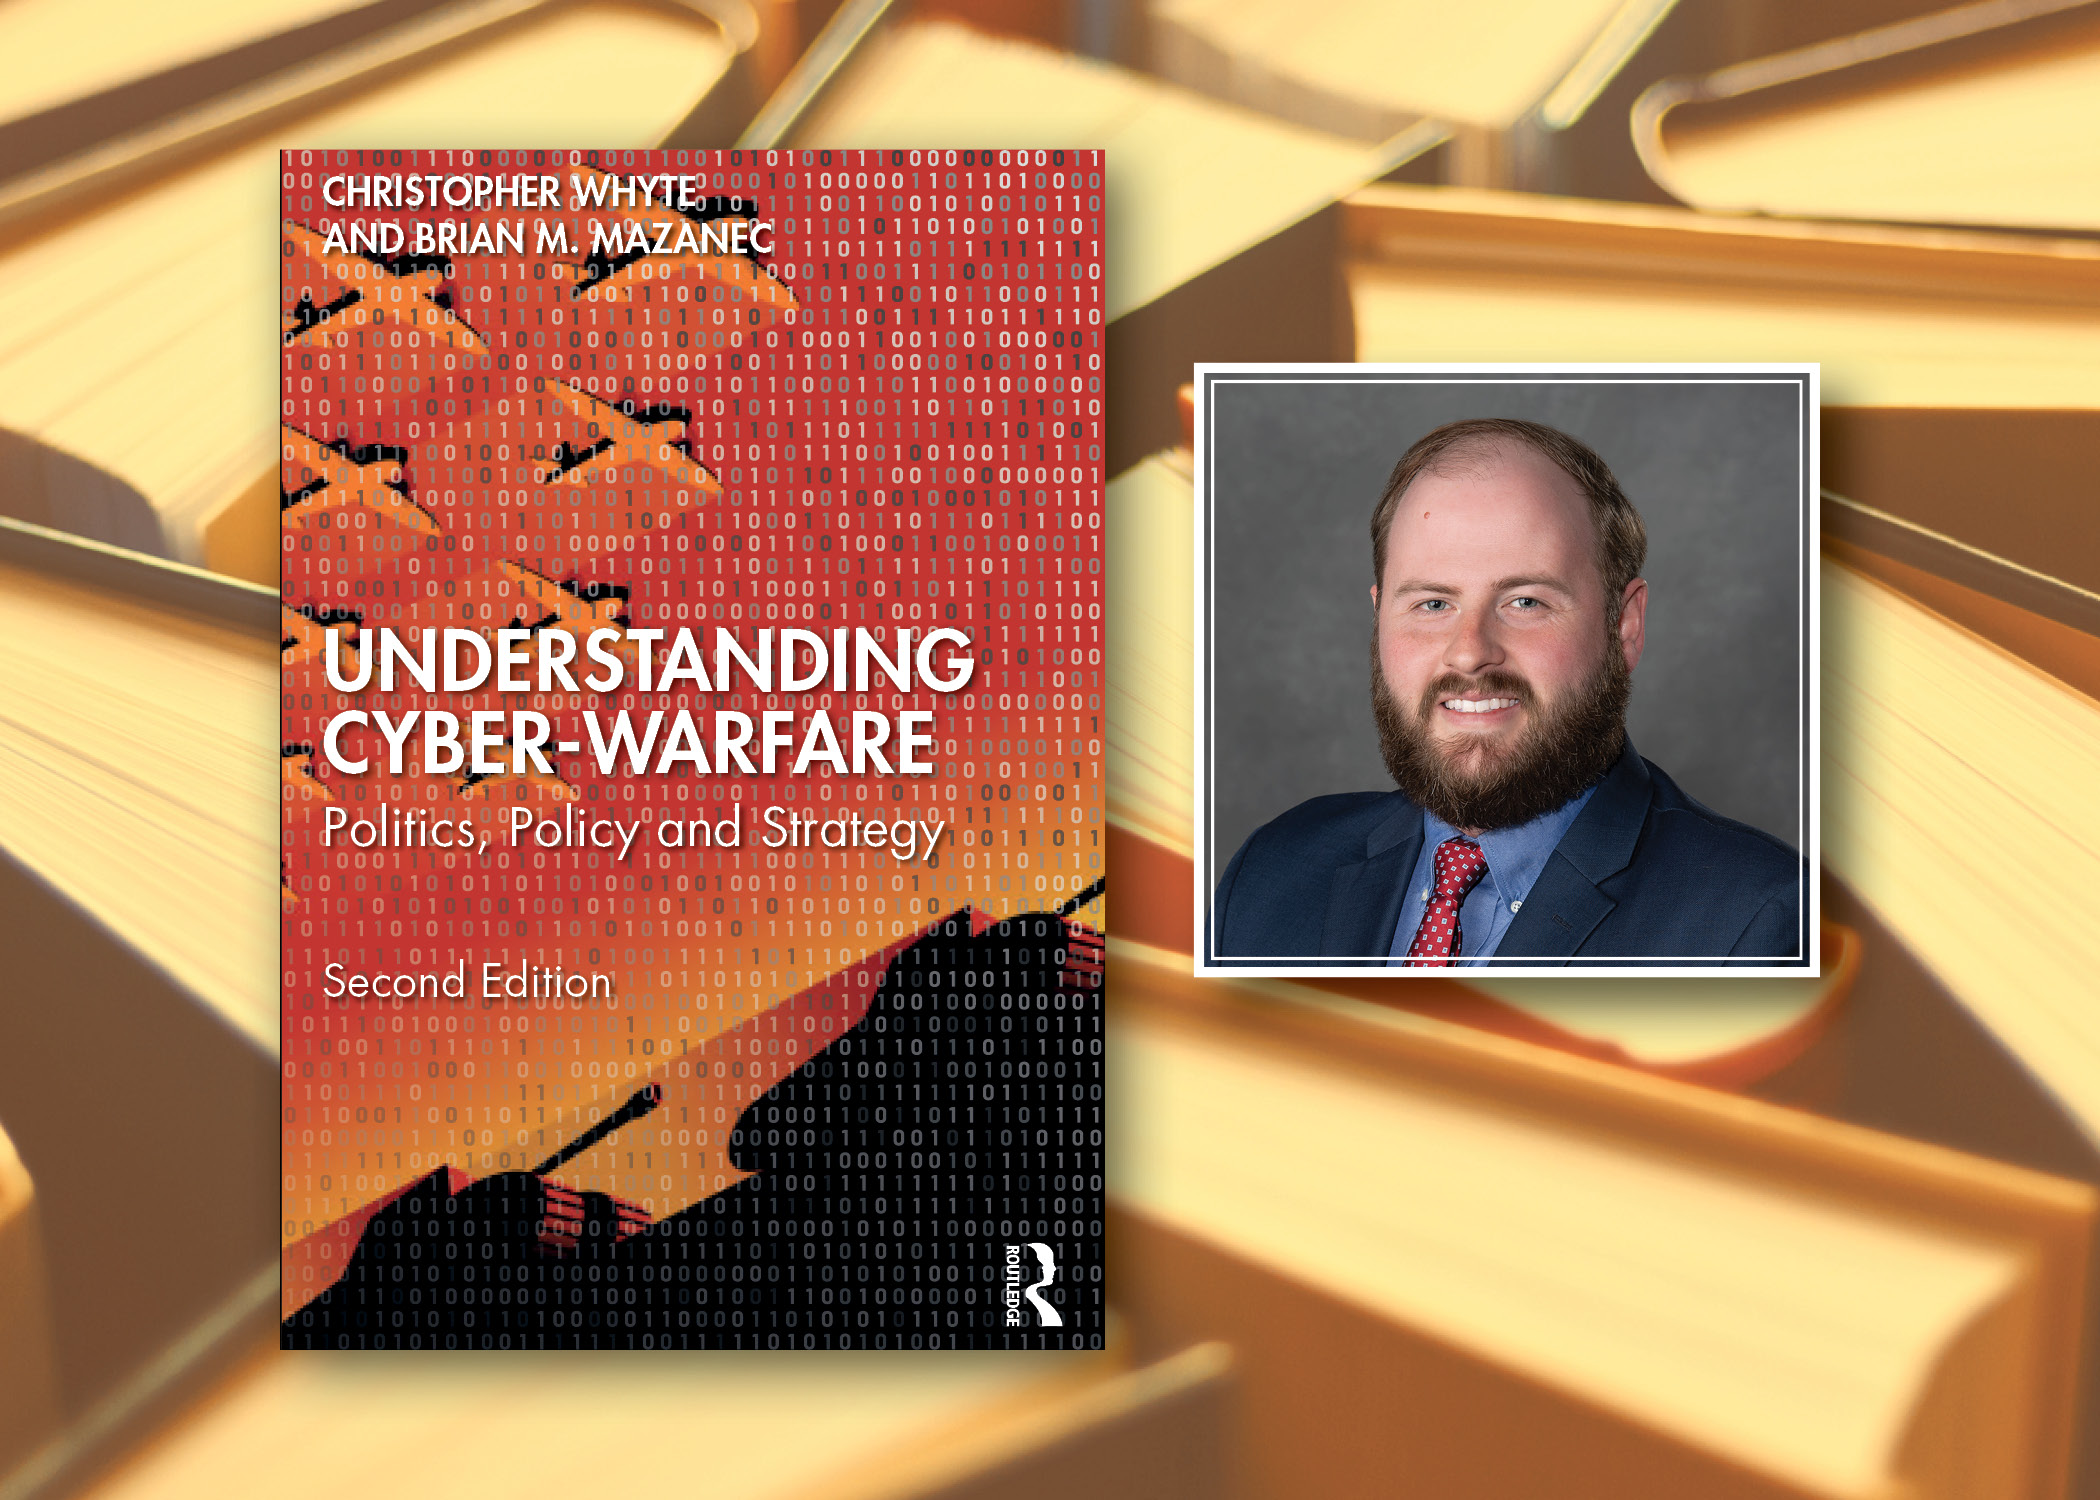 Christopher Whyte, an assistant professor of homeland security and emergency preparedness at the L. Douglas Wilder School of Government and Public Affairs at Virginia Commonwealth University, is the co-author of two recent books:  